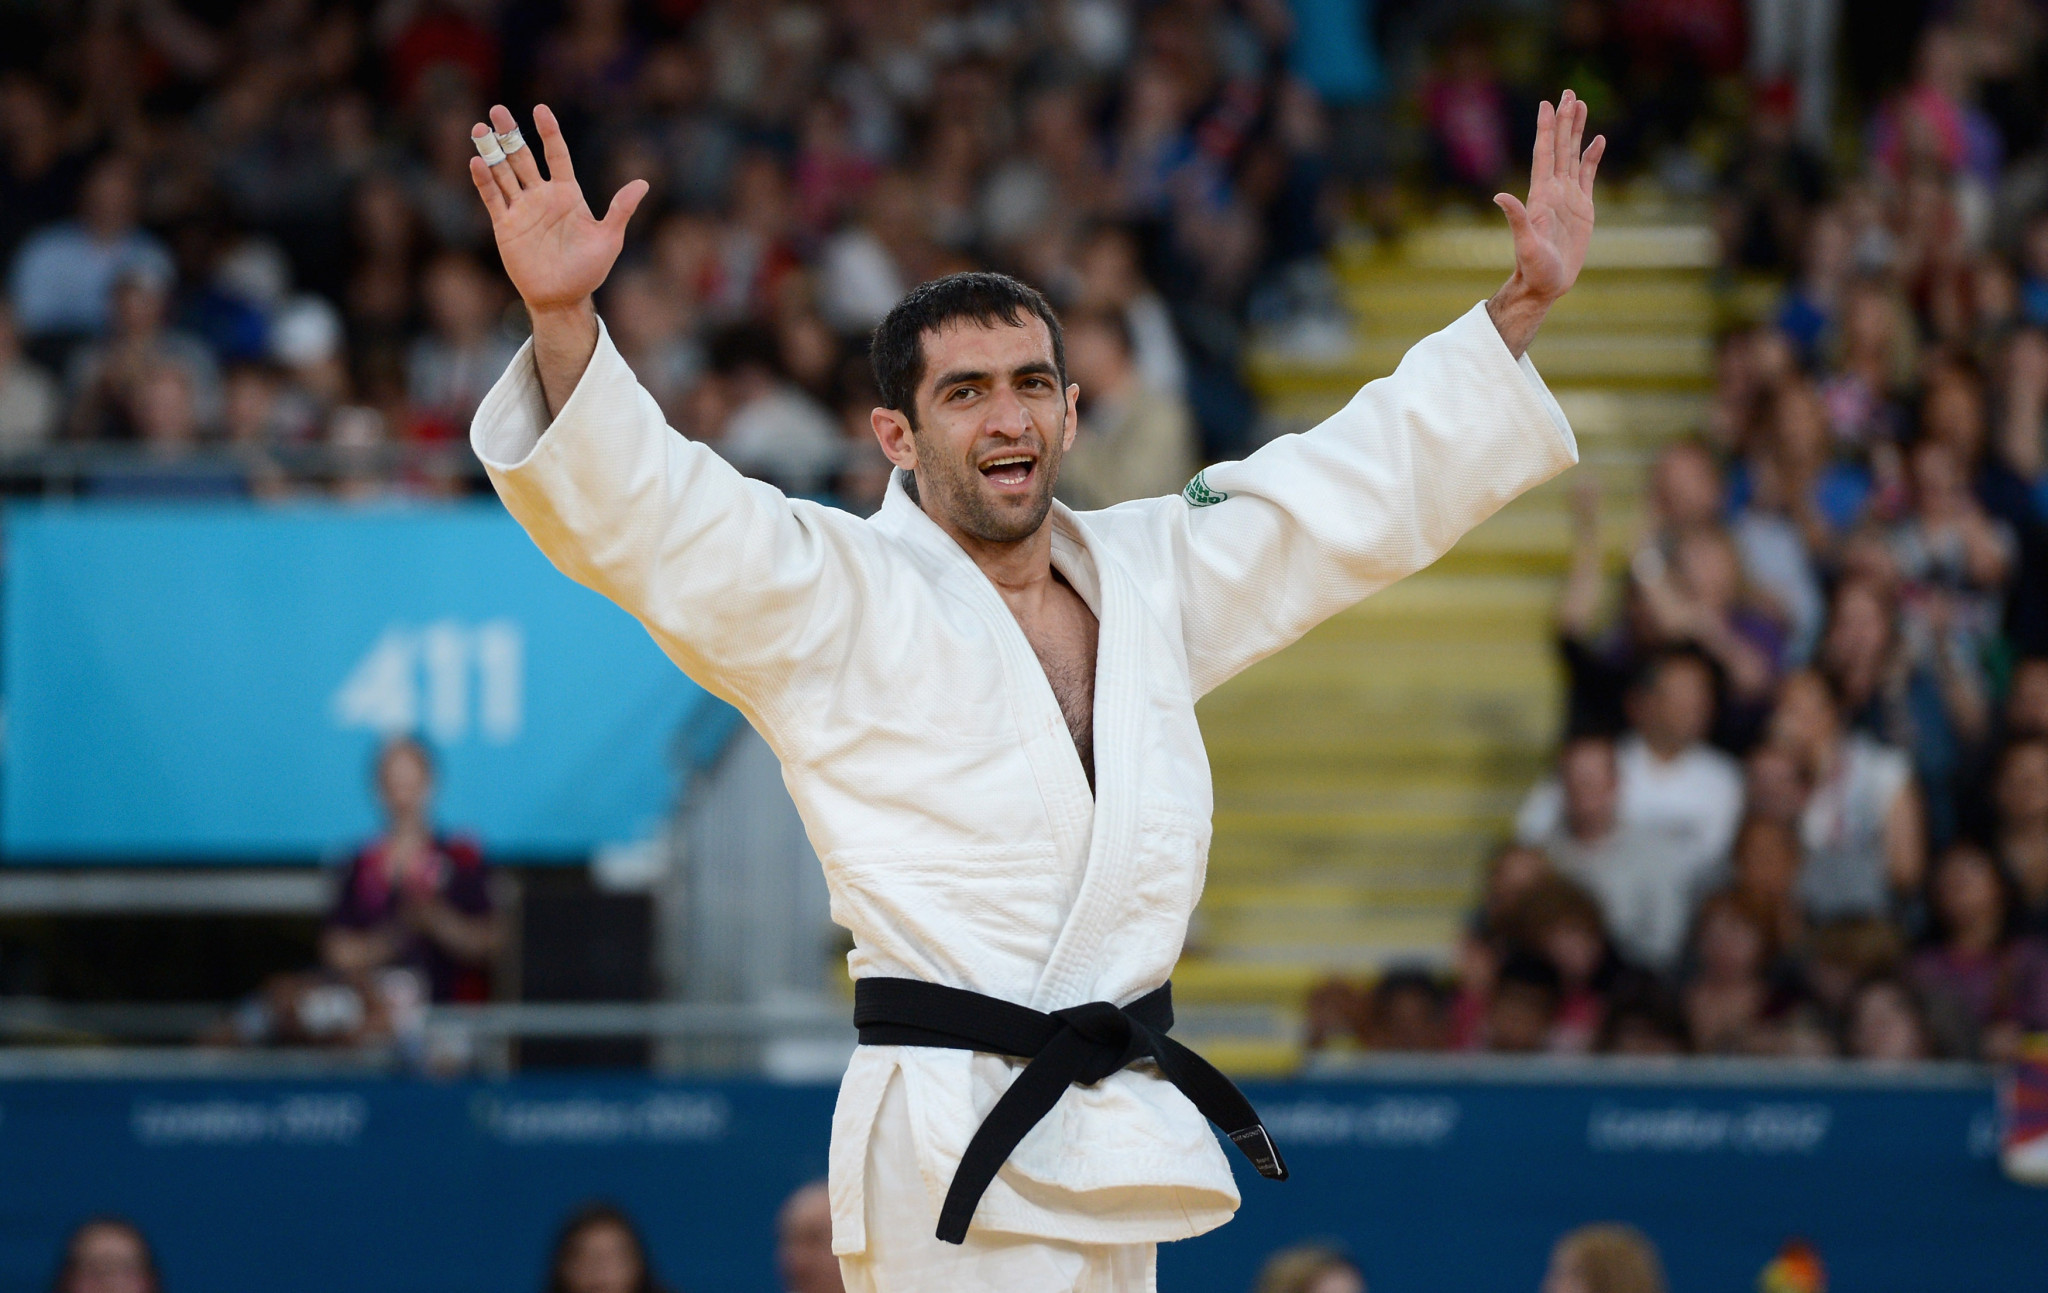 Ramin Ibrahimov, who won London 2012 gold in the under-60kg division, was praised for his work as head coach of the Azerbaijani women's Para judo team ©Getty Images